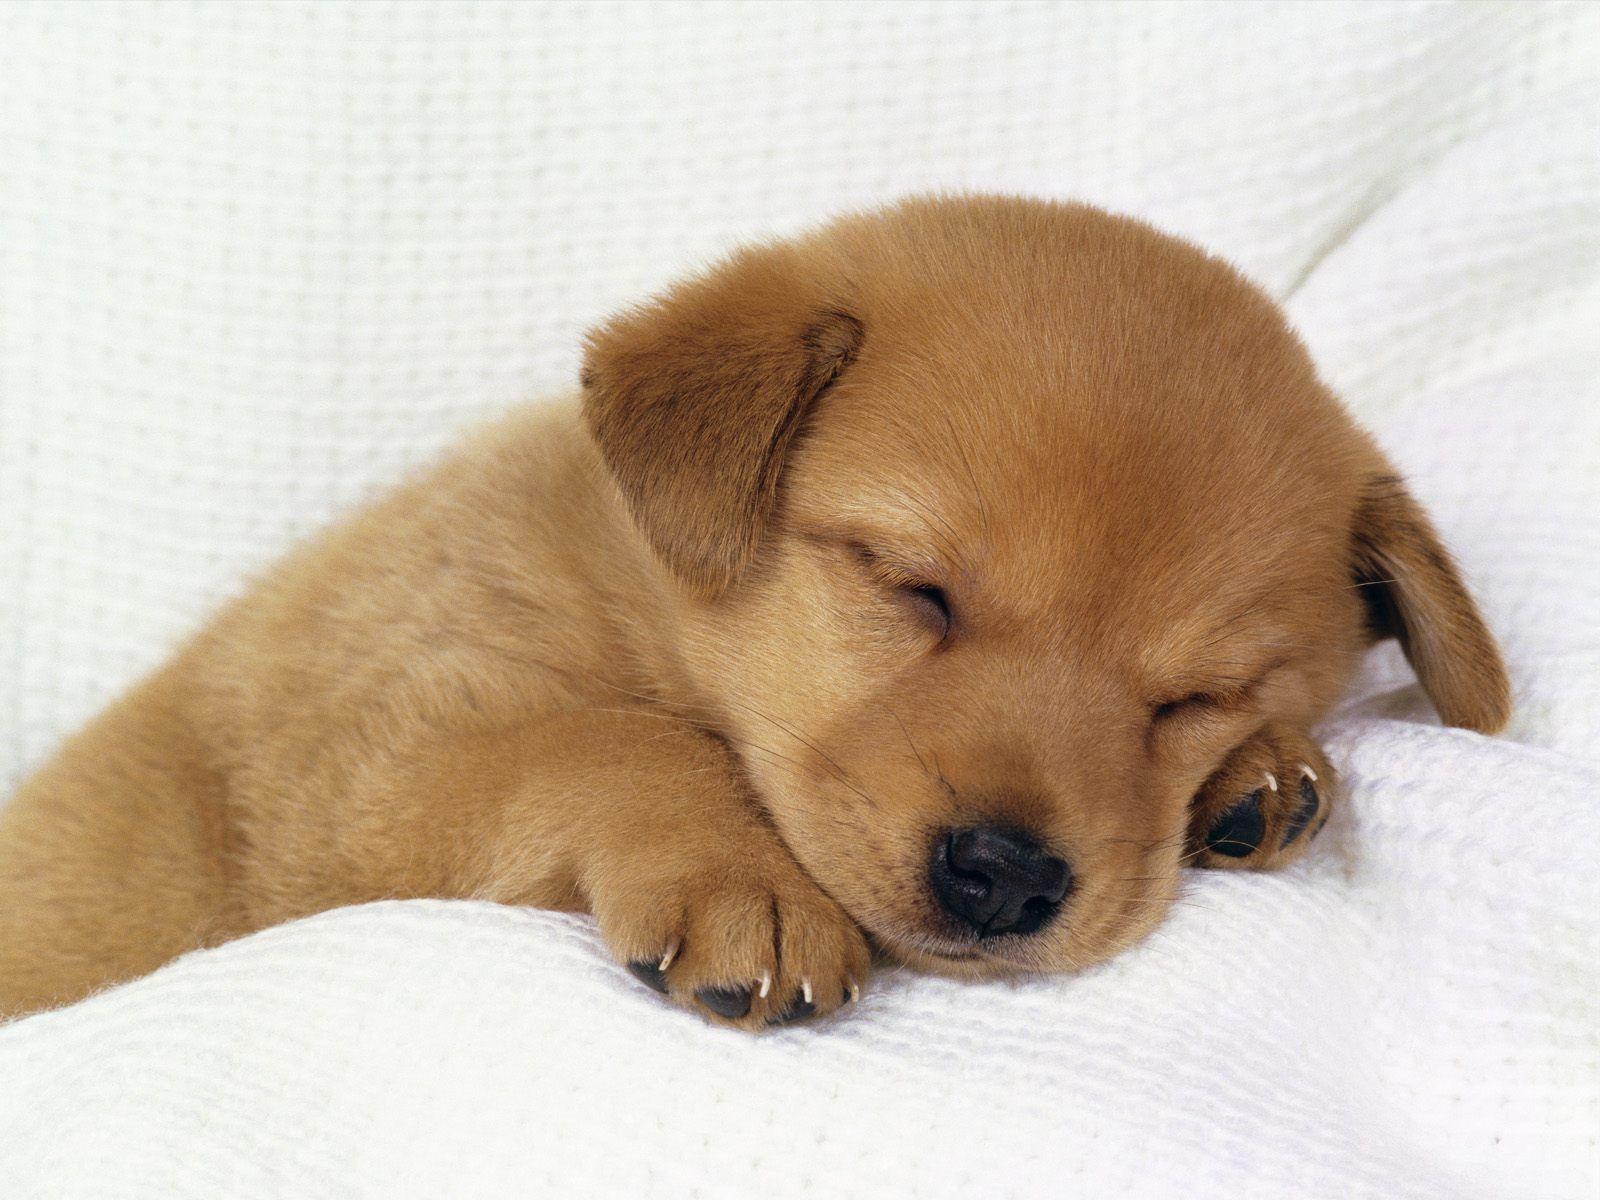 Cute Baby Dog Wallpaper Background. Baby dogs, Sleeping